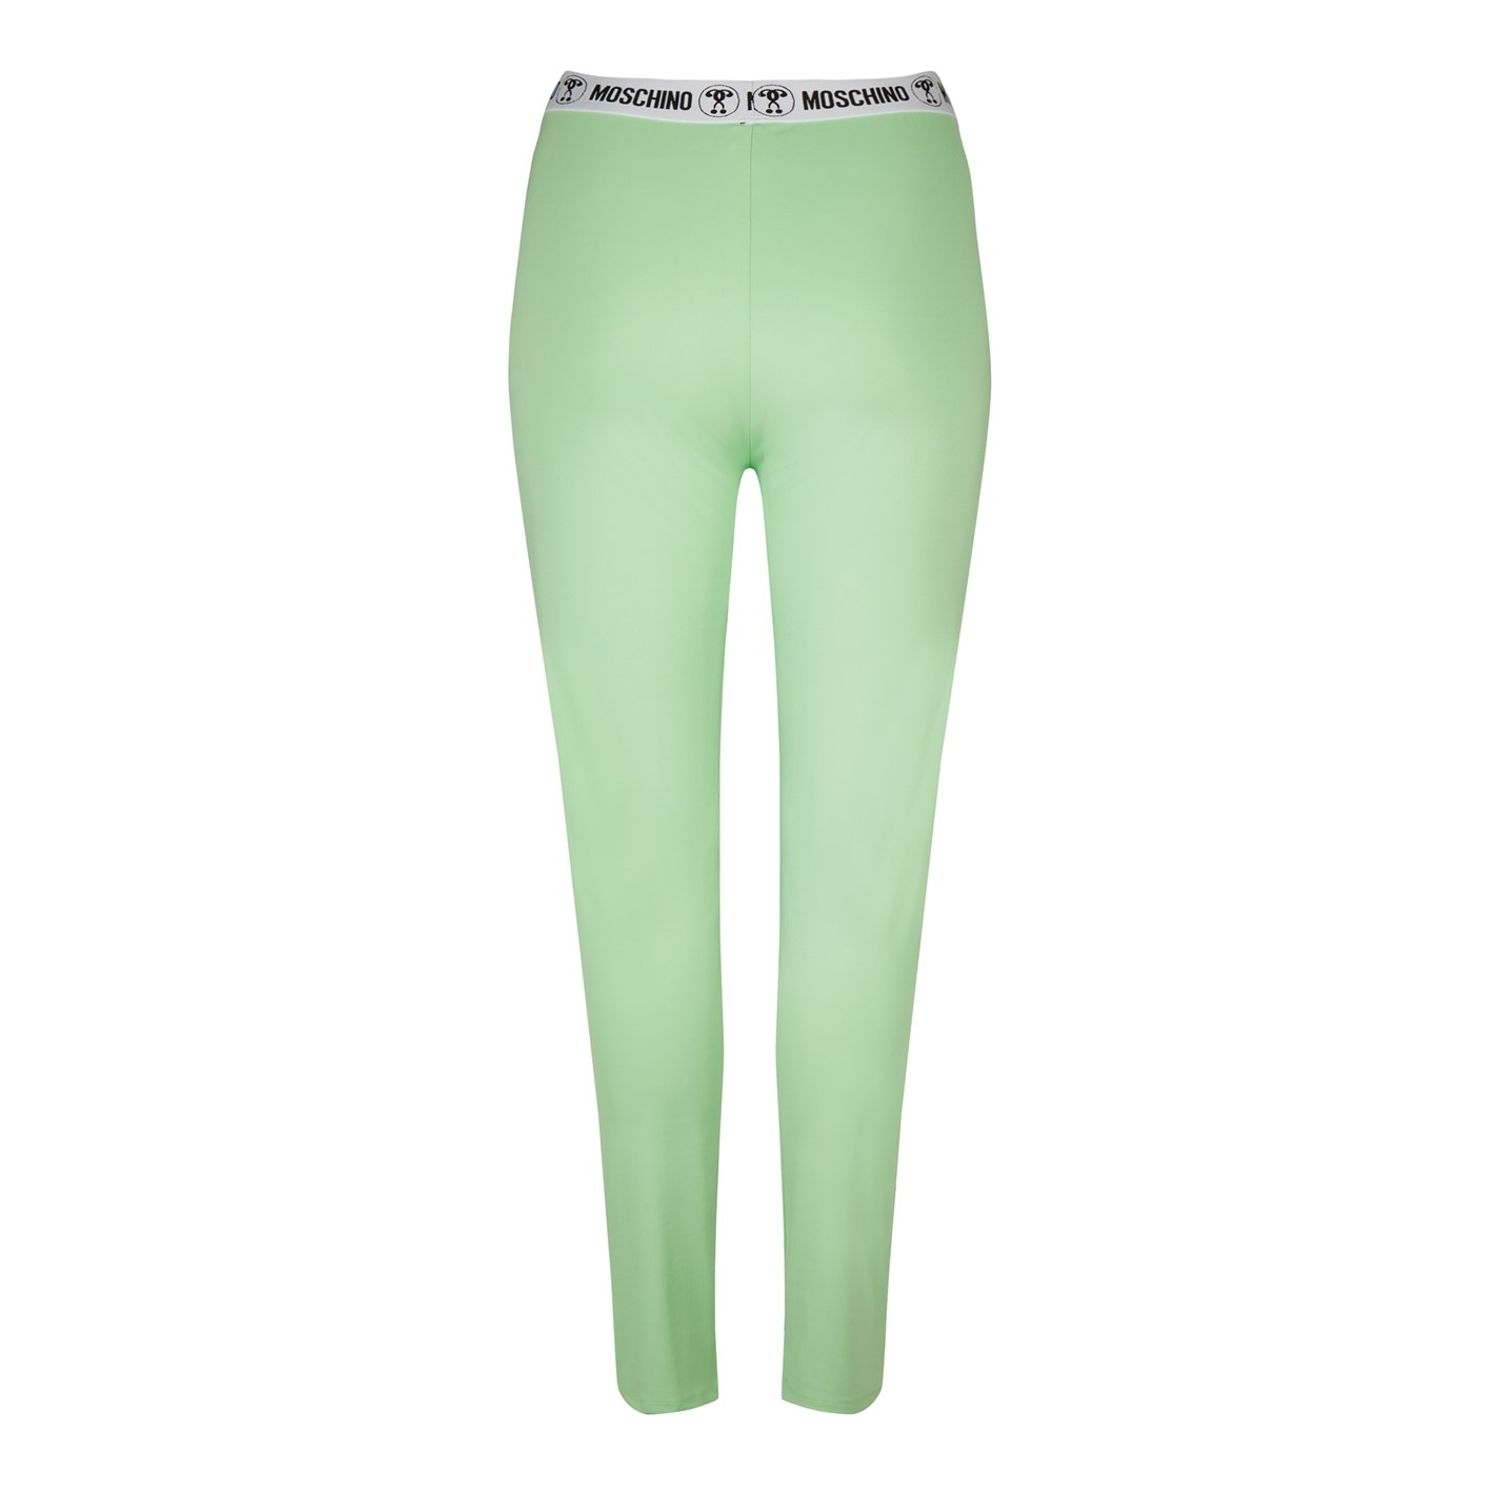 Moschino Question Mark Leggings in Green